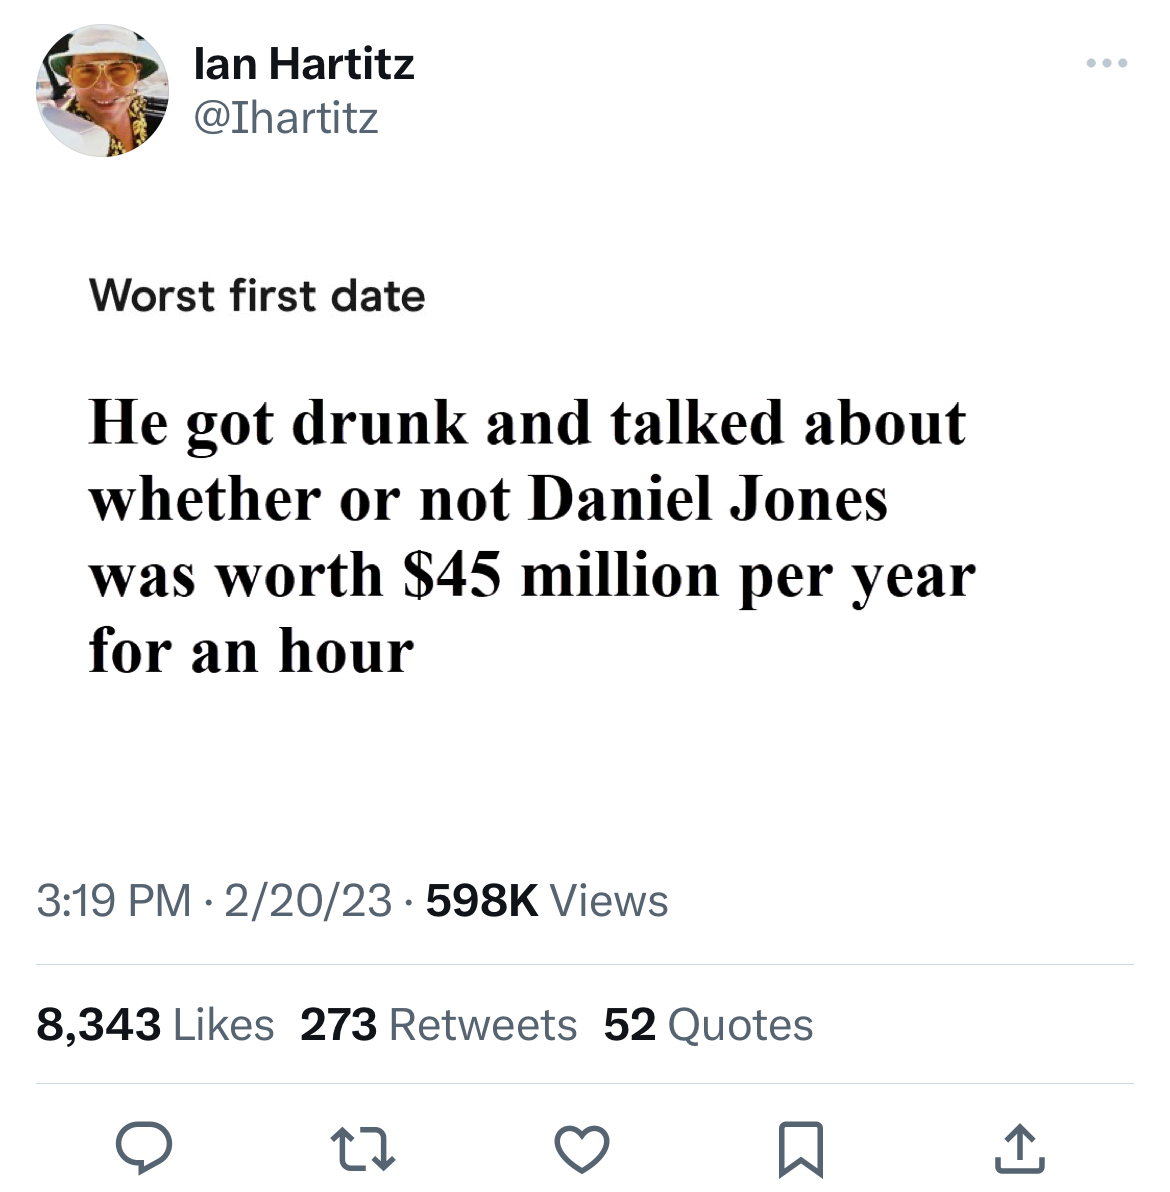 Unhinged Tweets - lan Hartitz Worst first date He got drunk and talked about whether or not Daniel Jones was worth $45 million per year for an hour 220 Views 8,343 273 52 Quotes 17